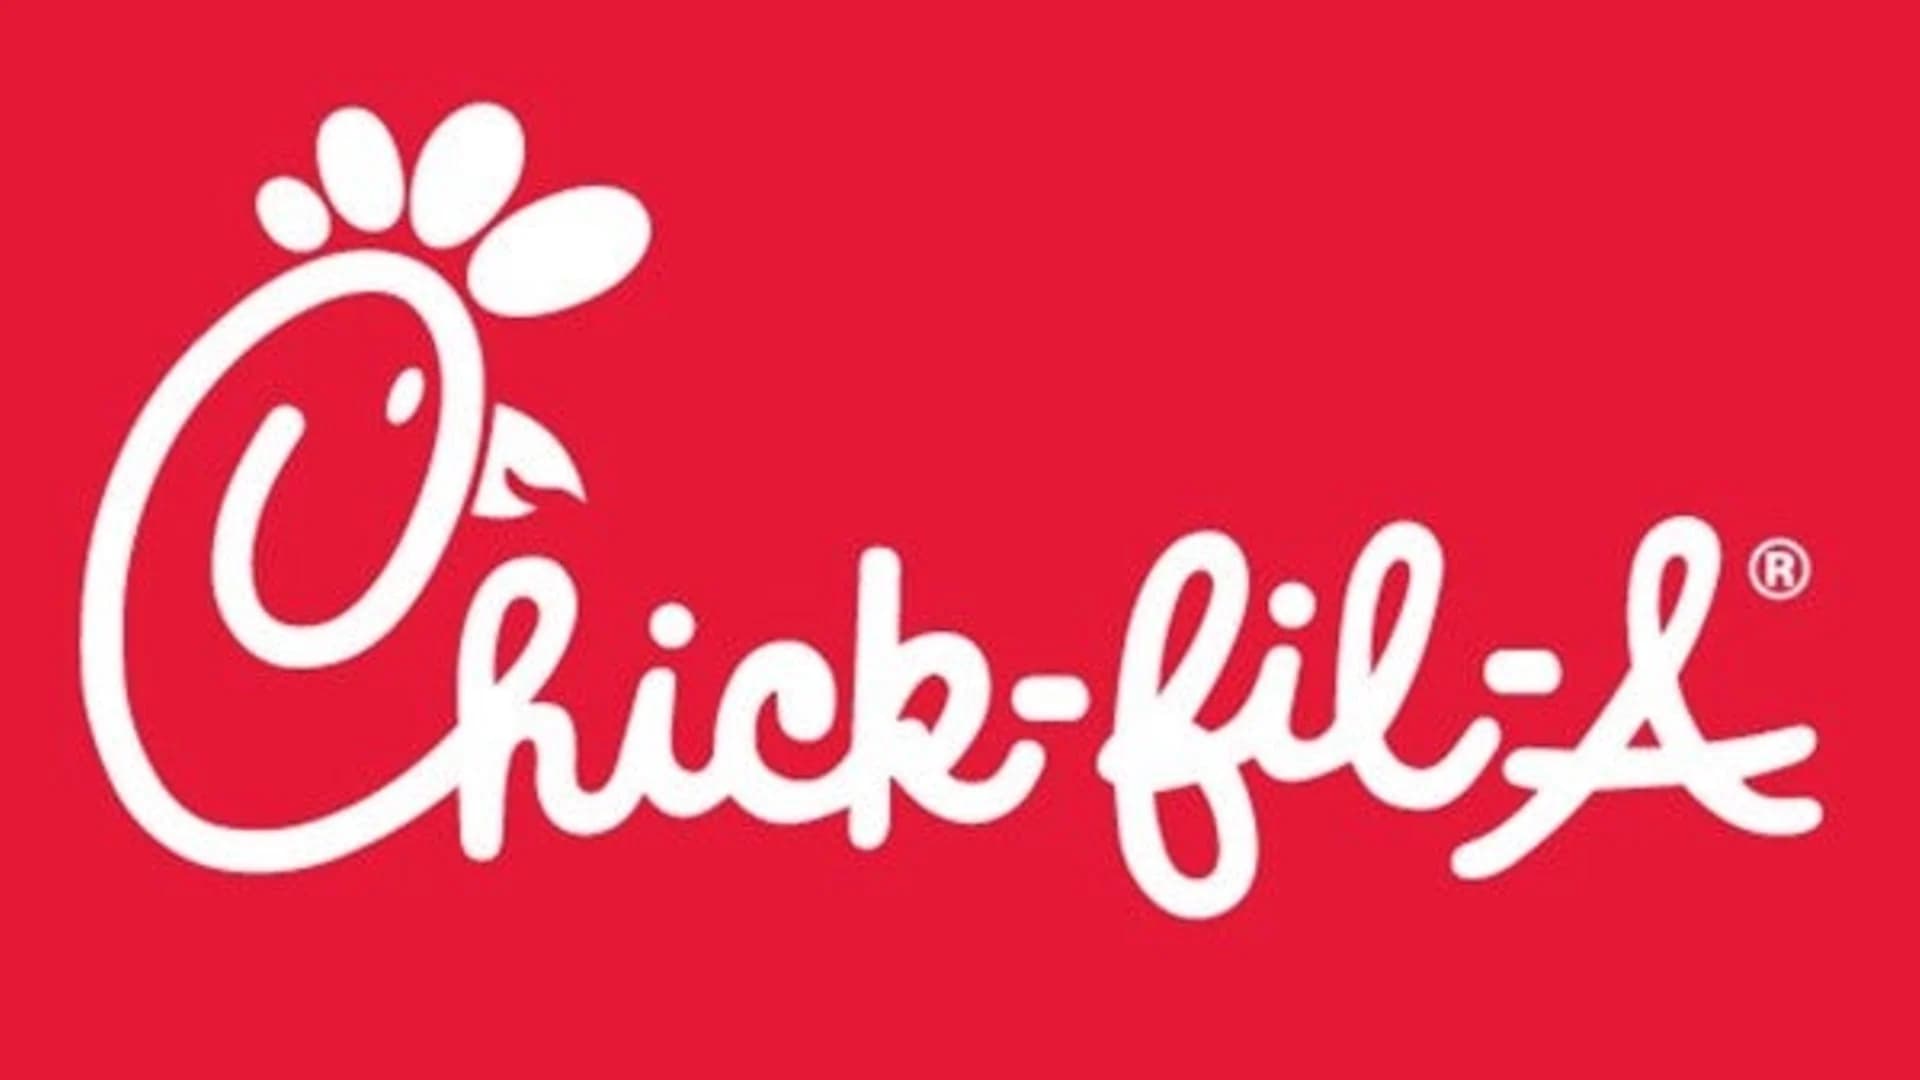 Chick-fil-A gives away free chicken in honor of 'Cow Appreciation Day'